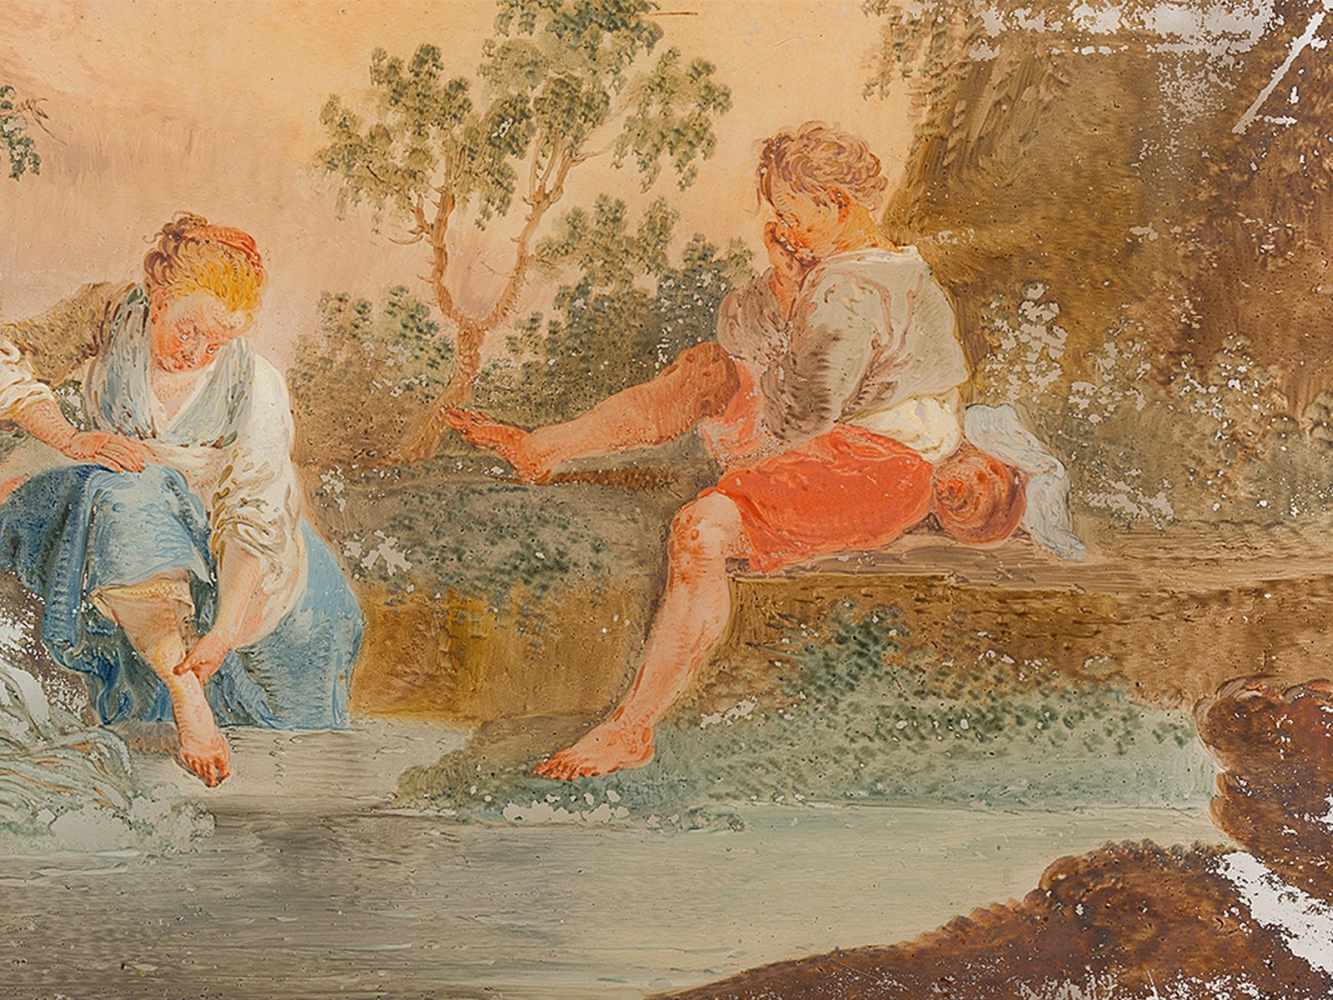 Children By the River, Reverse Glass Painting, French, 18th C. - Image 5 of 9